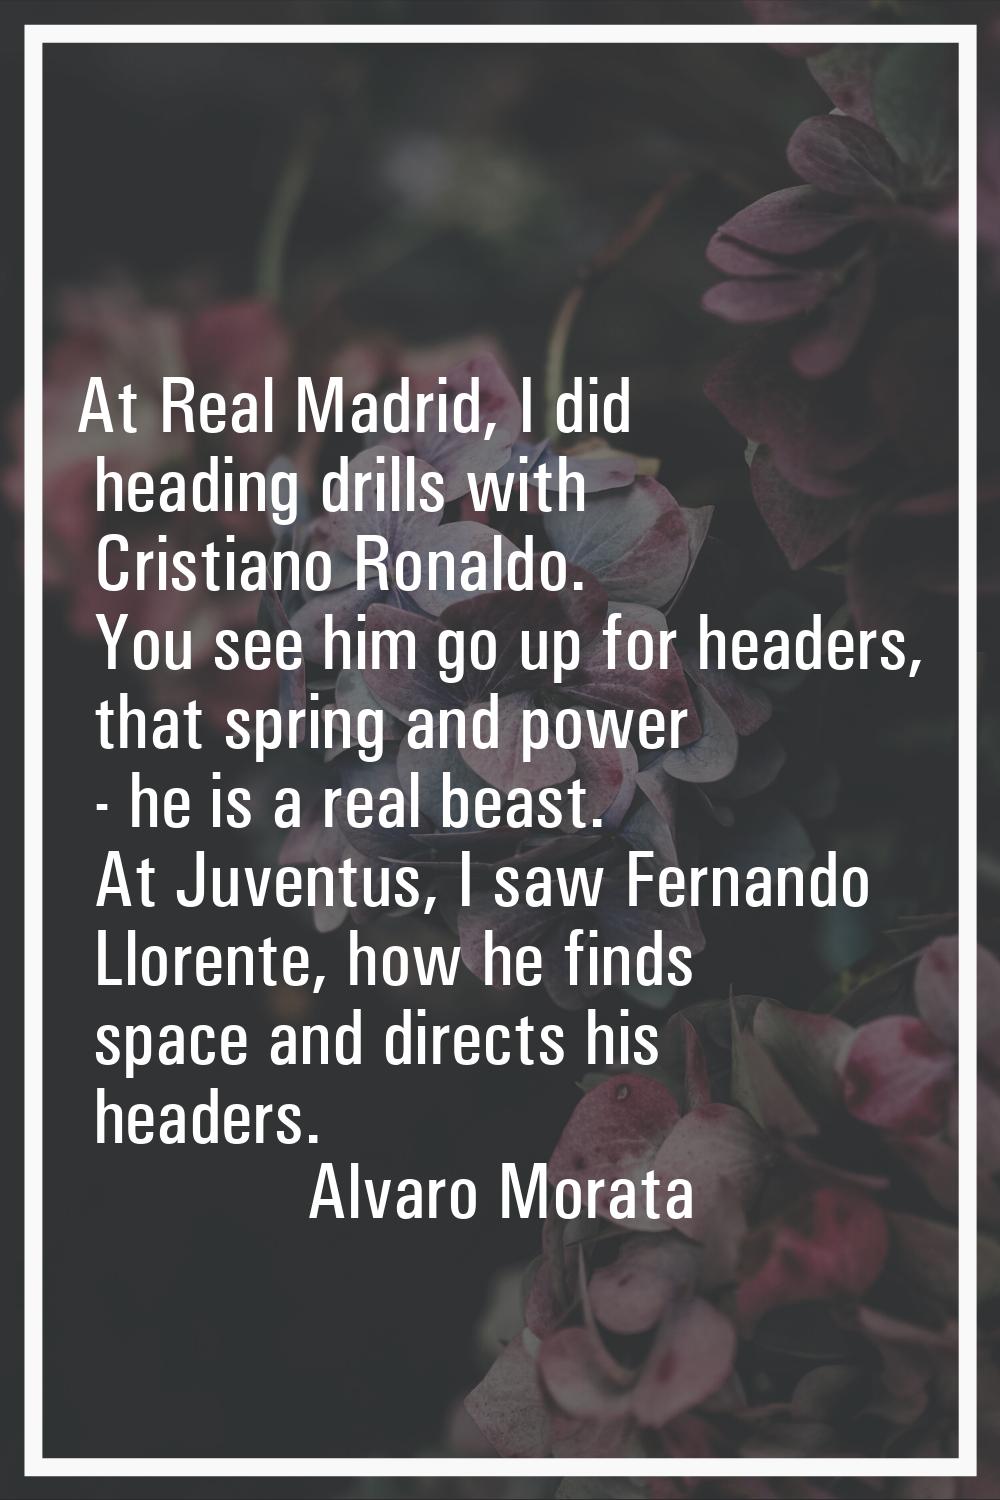 At Real Madrid, I did heading drills with Cristiano Ronaldo. You see him go up for headers, that sp